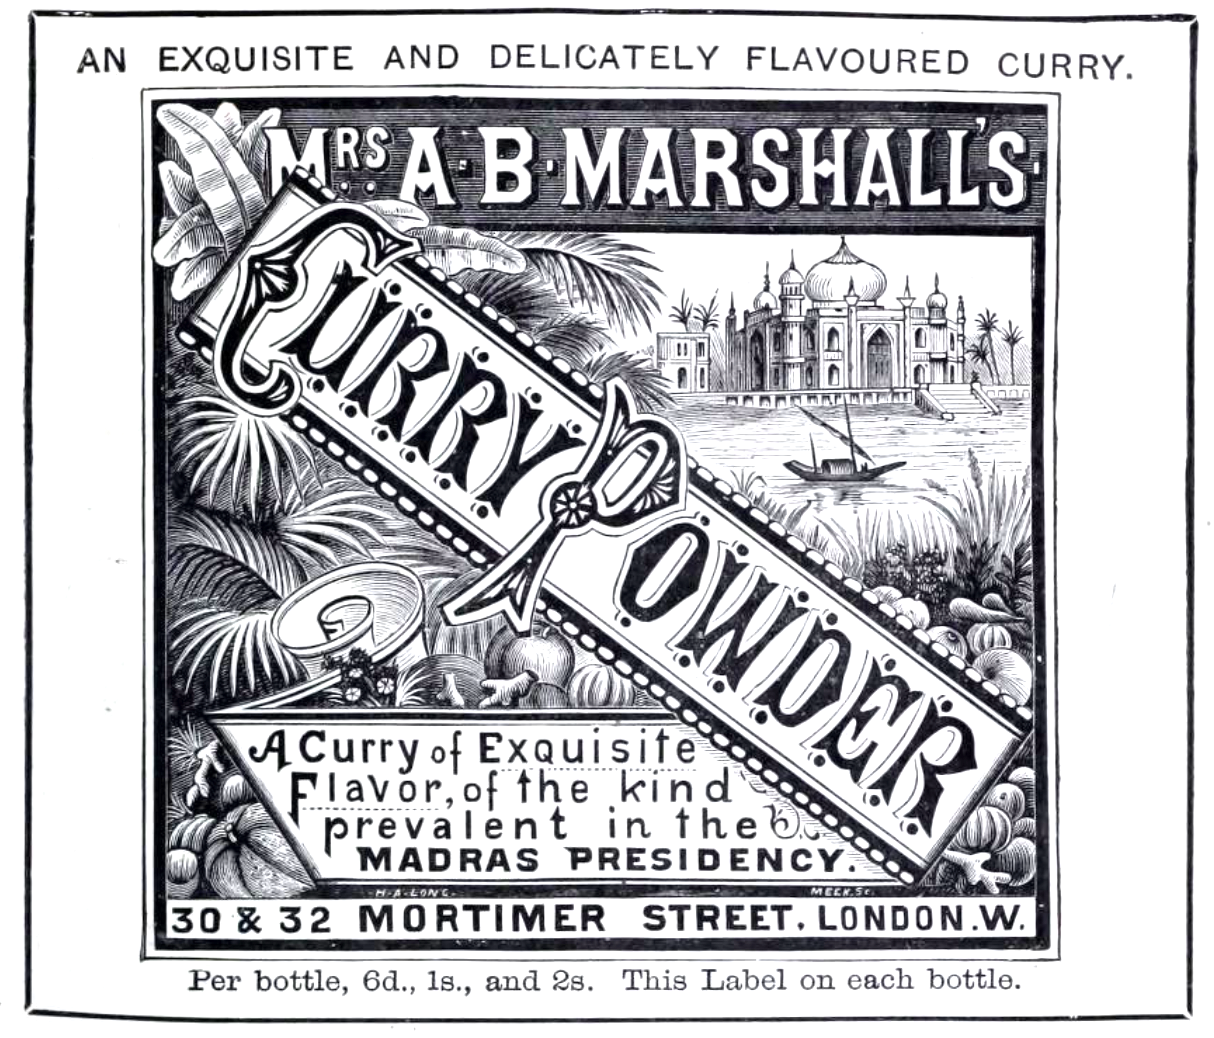 A curry powder ad in an early 1900s British cookbook. Outside India, curry powders sold and marketed by English companies purported to faithfully reflect Indian cuisine.